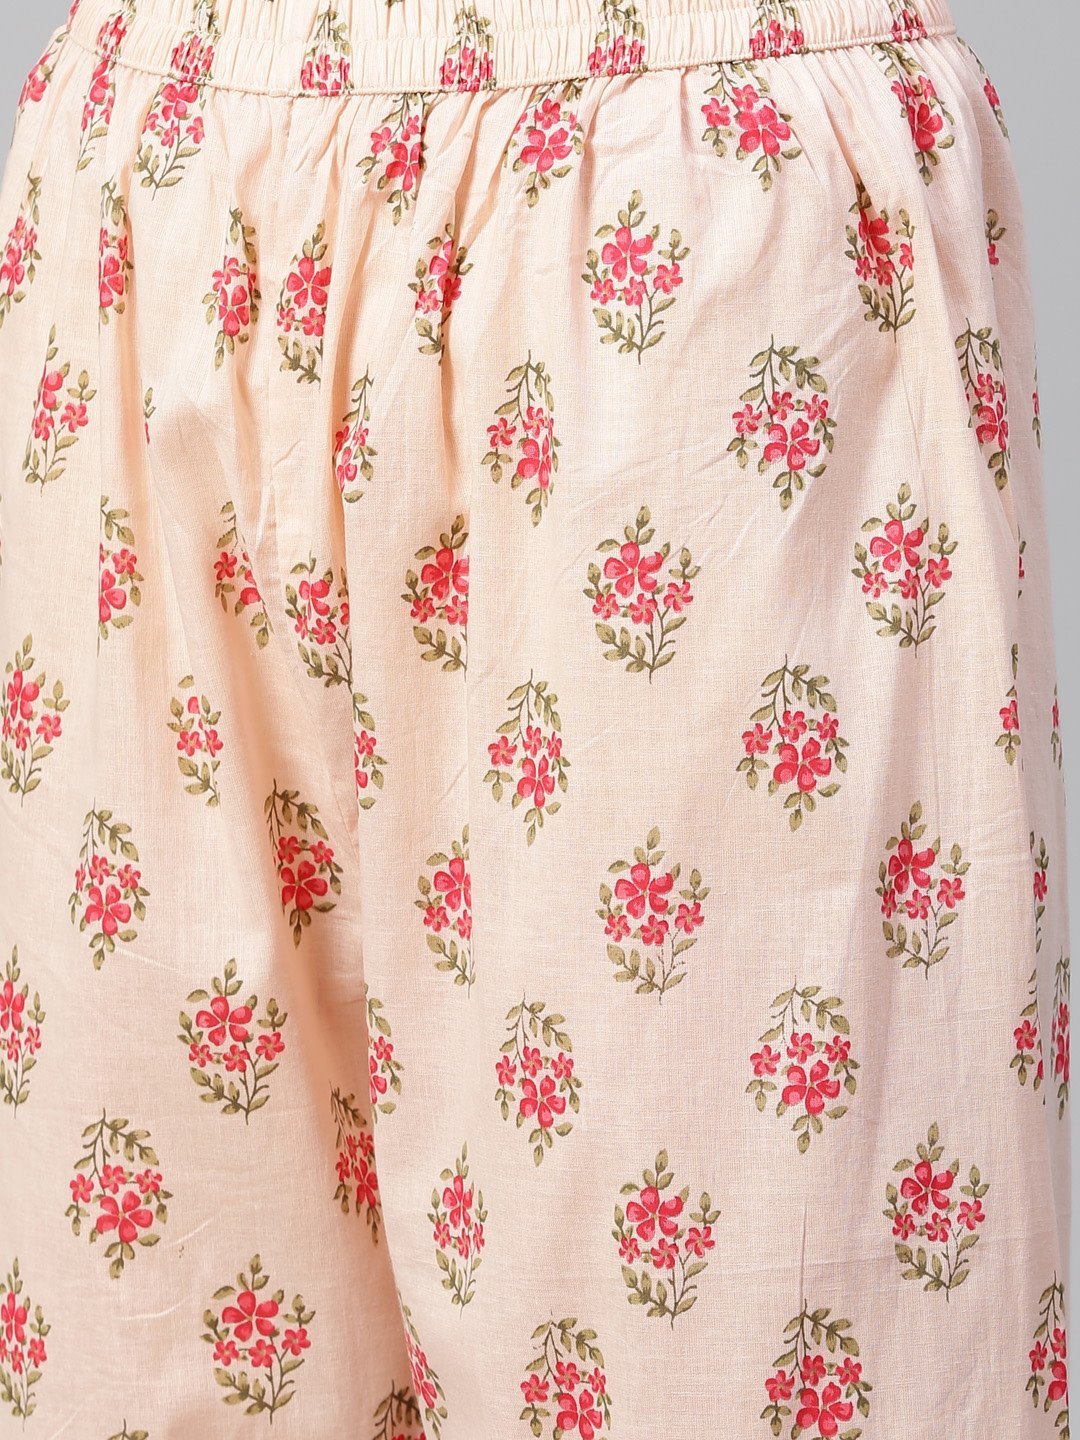 Women's Pink Floral Printed Kurta with Palazzos - Jompers